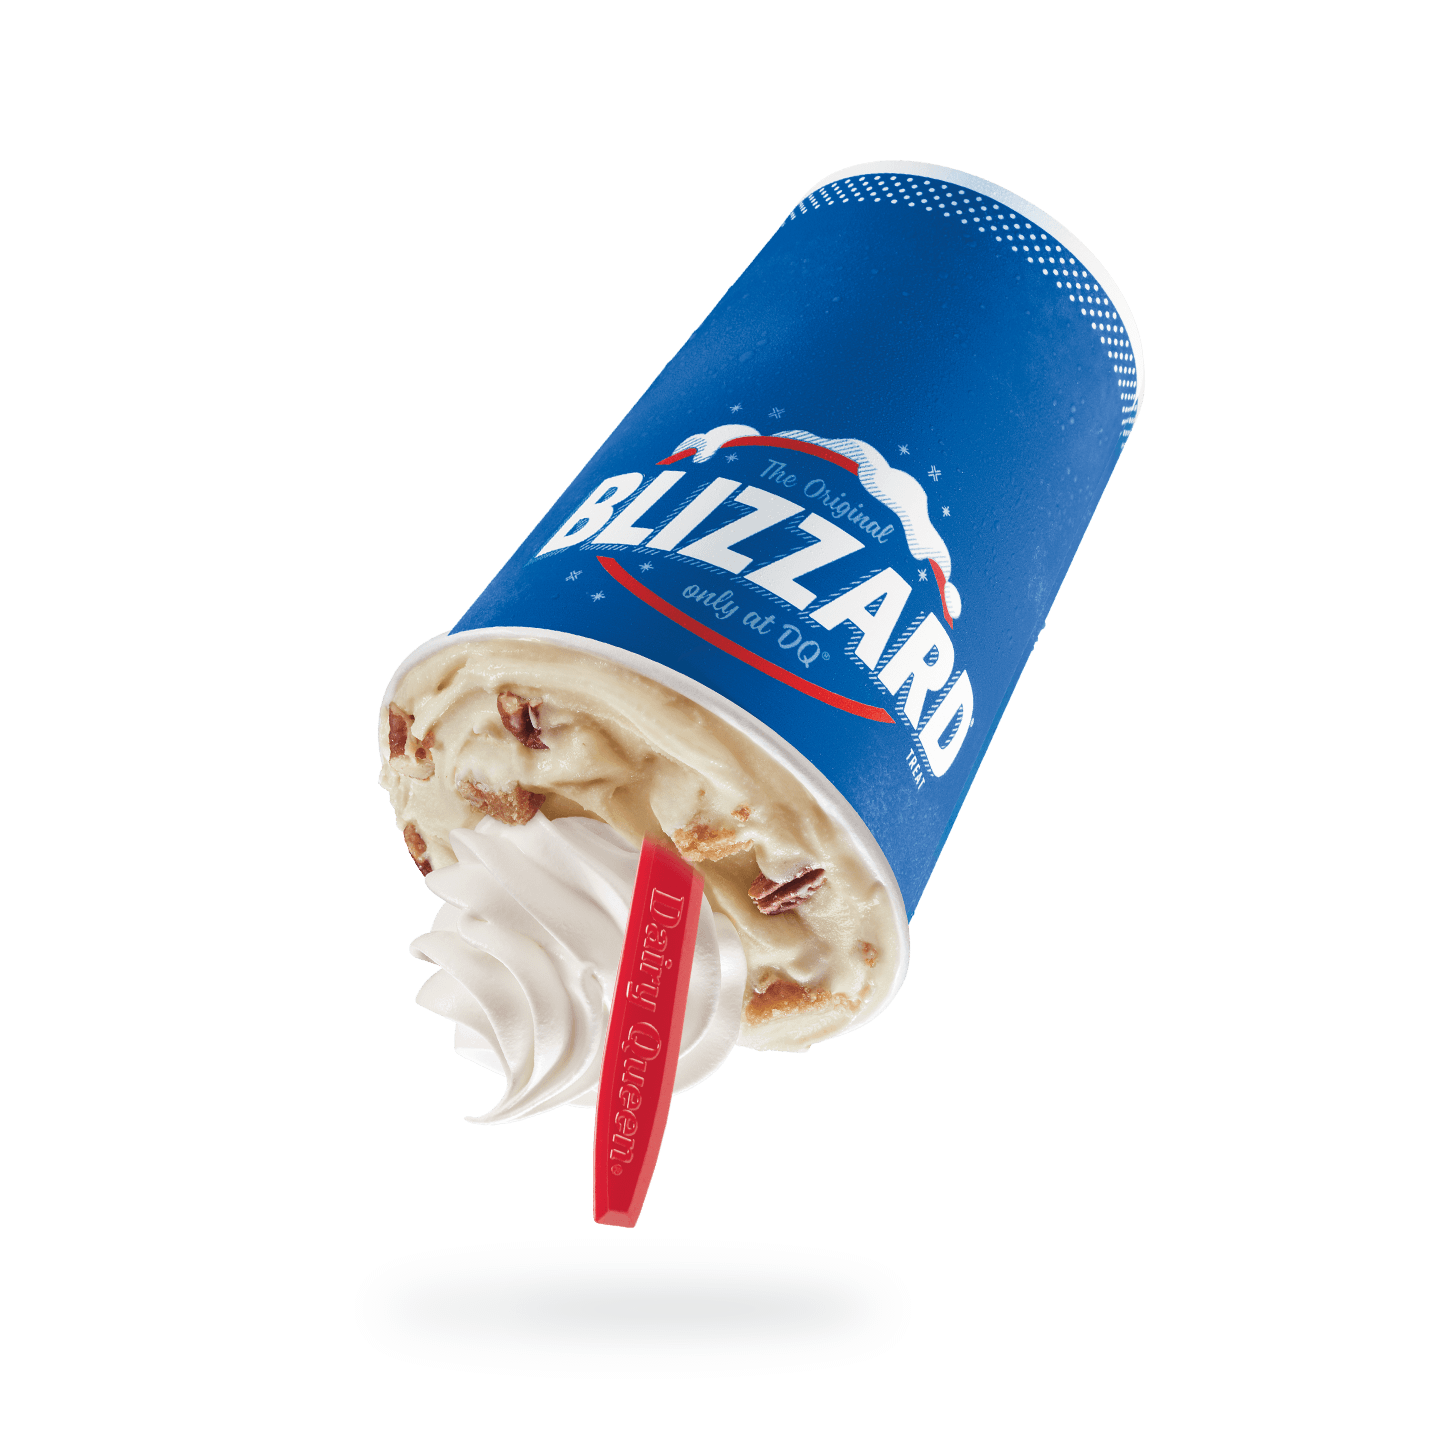 Dairy Queen Large Pecan Pie Blizzard Nutrition Facts